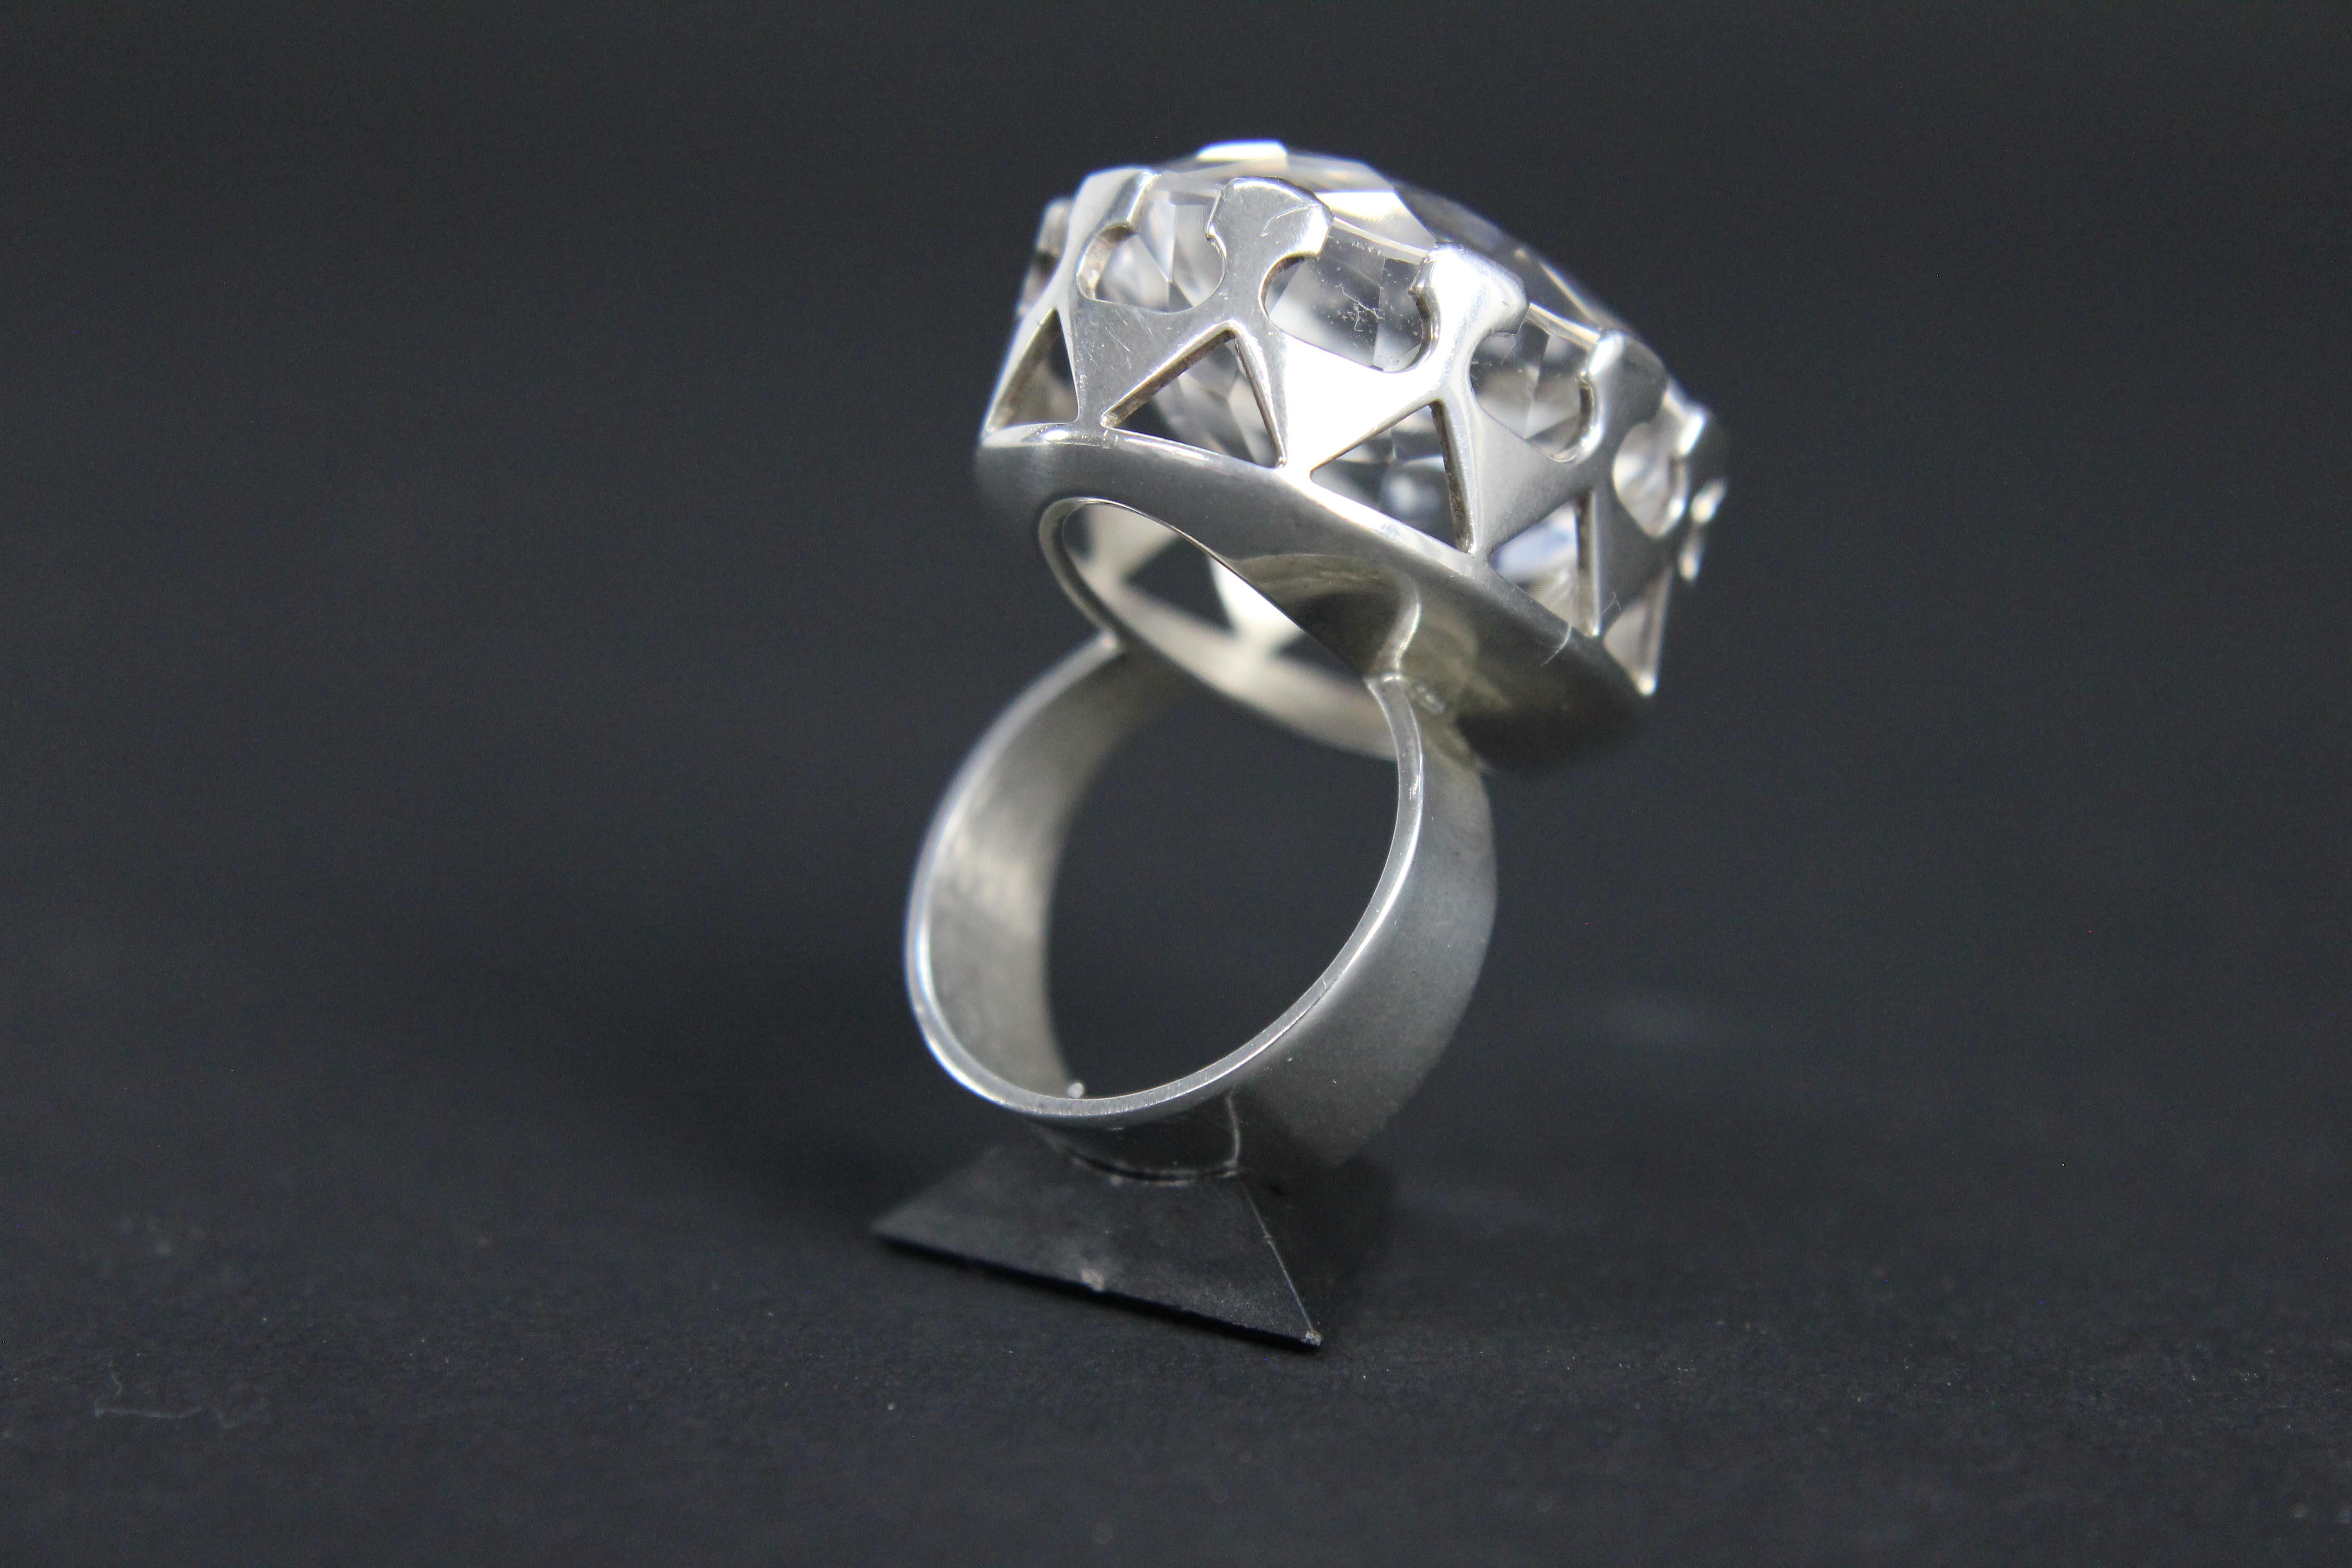 Women's Modernist Ring in Silver and a Large Rock Crystal by Kaplan, Stockholm, 1968 For Sale